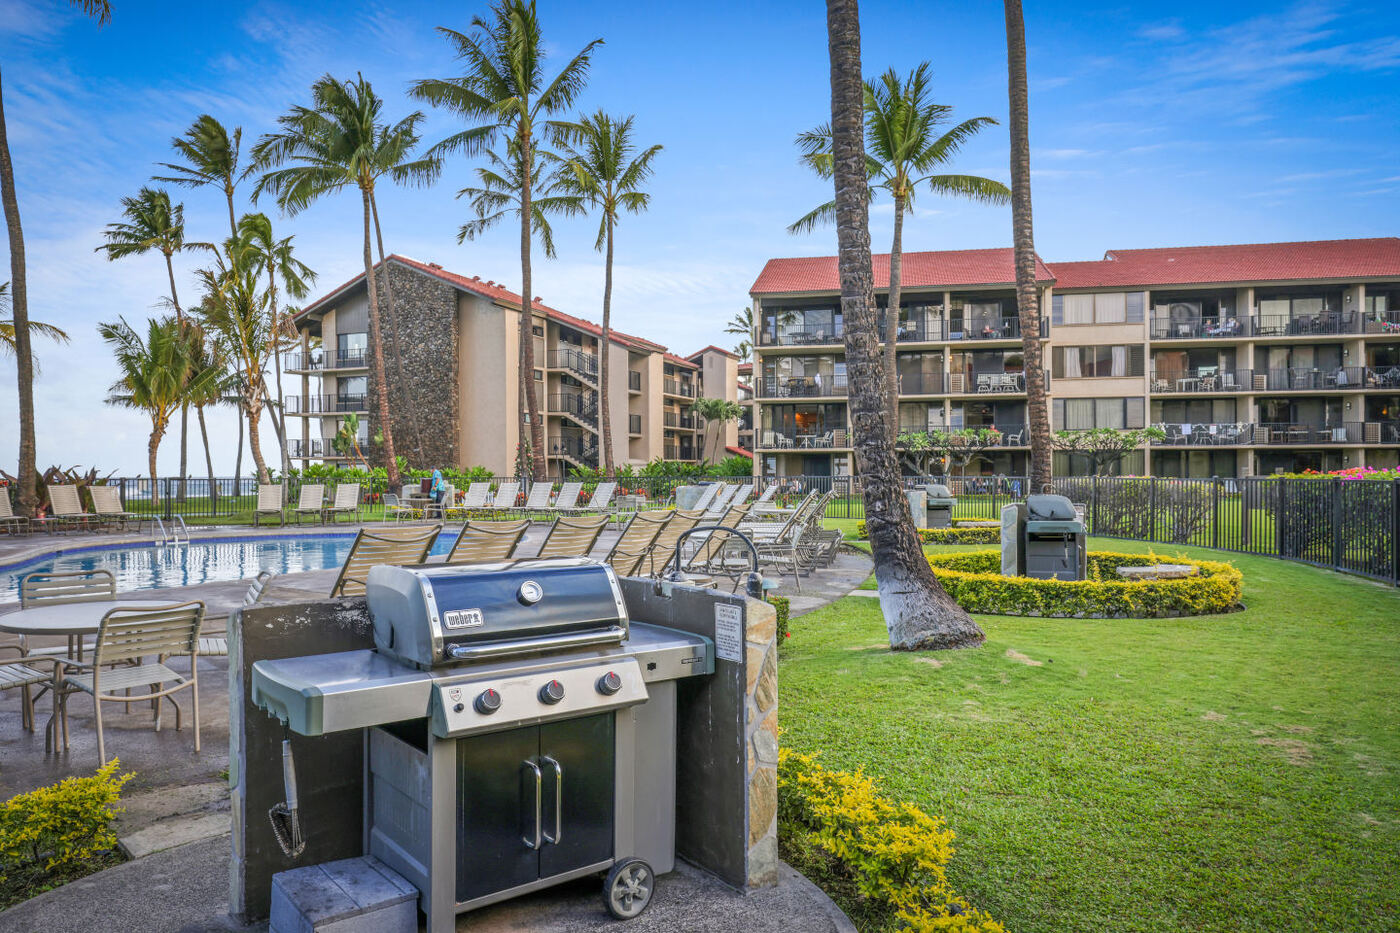 Barbecue grill on resort lawn